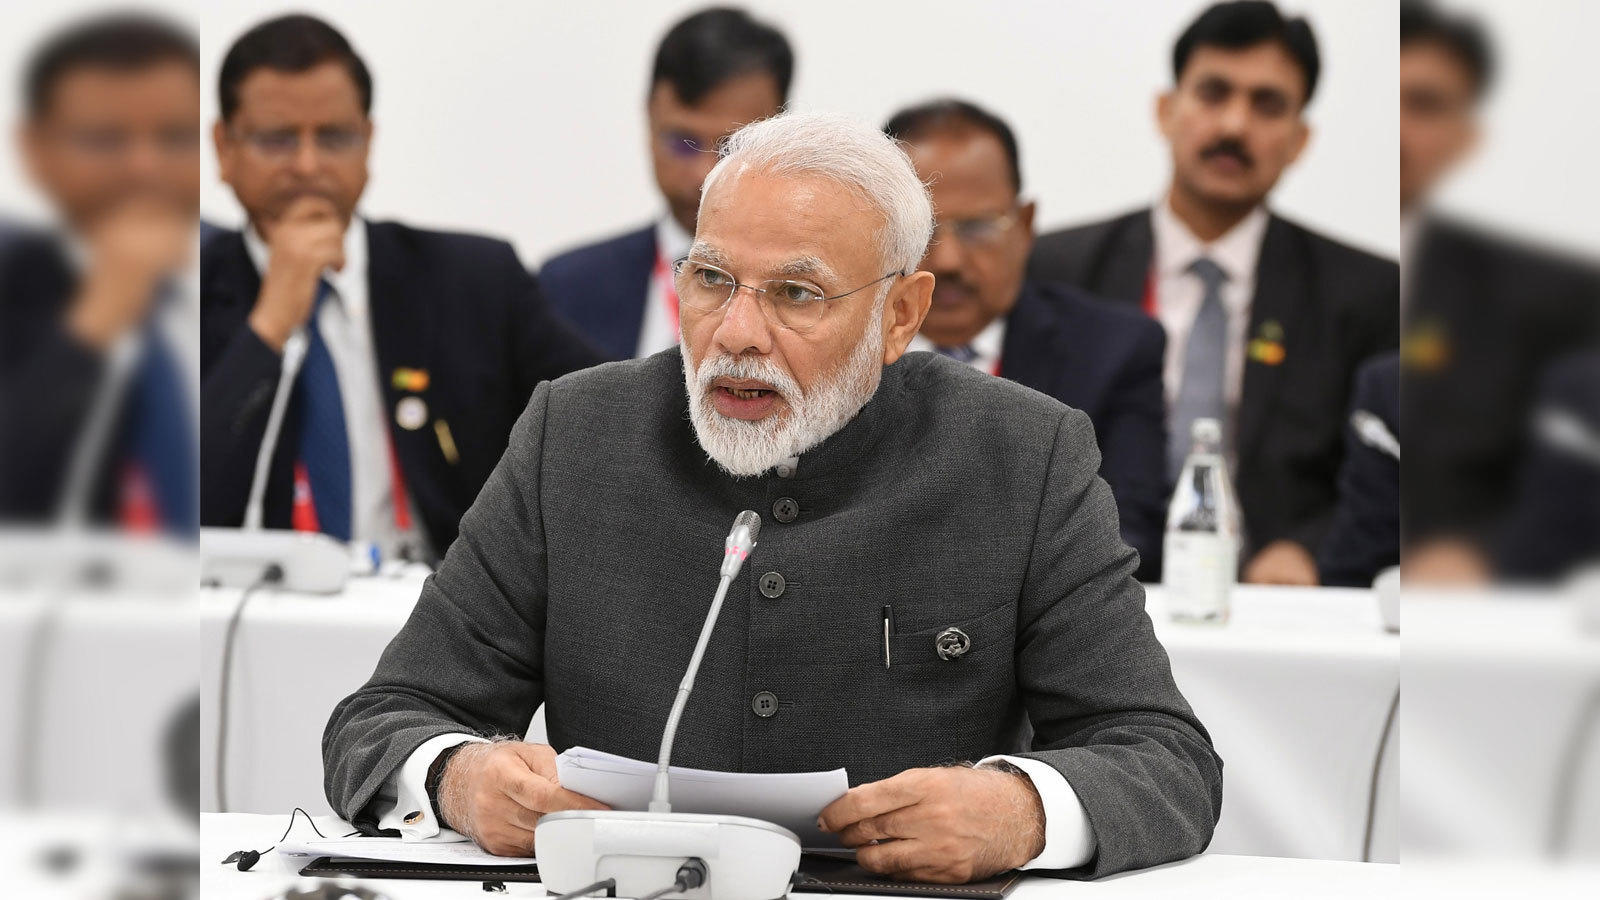 PM Modi to roll out vision paper in December, lay out key long-term goals